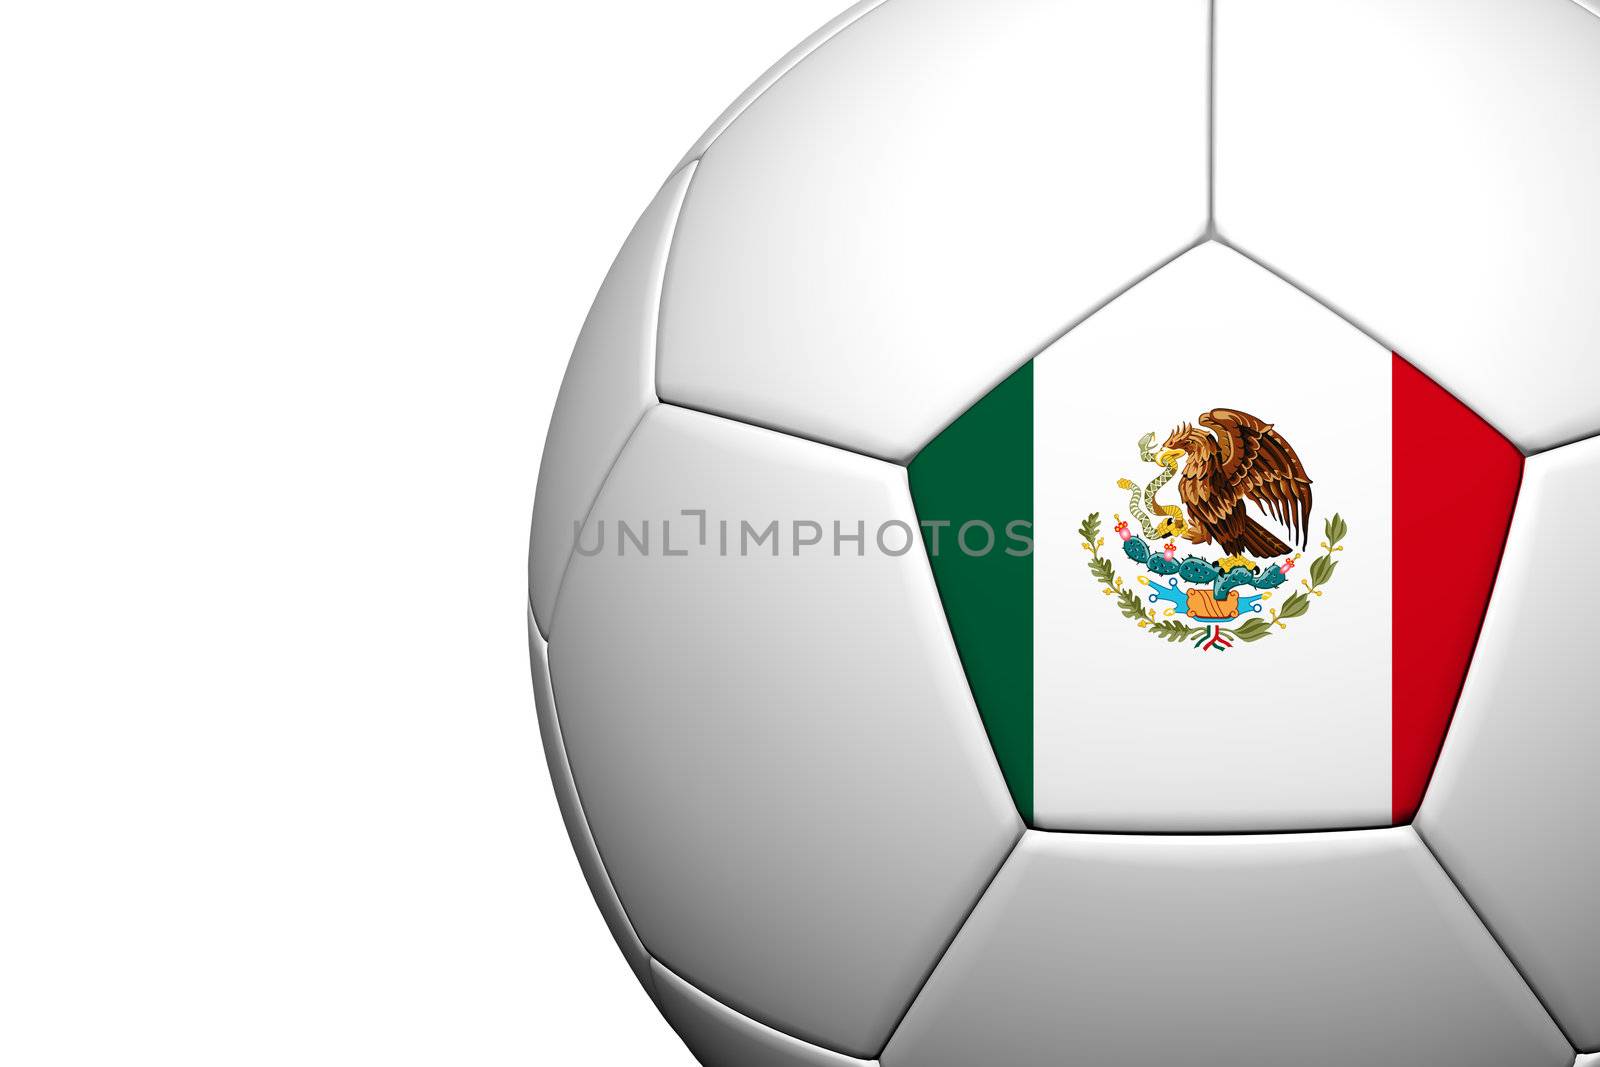 Mexico Flag Pattern 3d rendering of a soccer ball